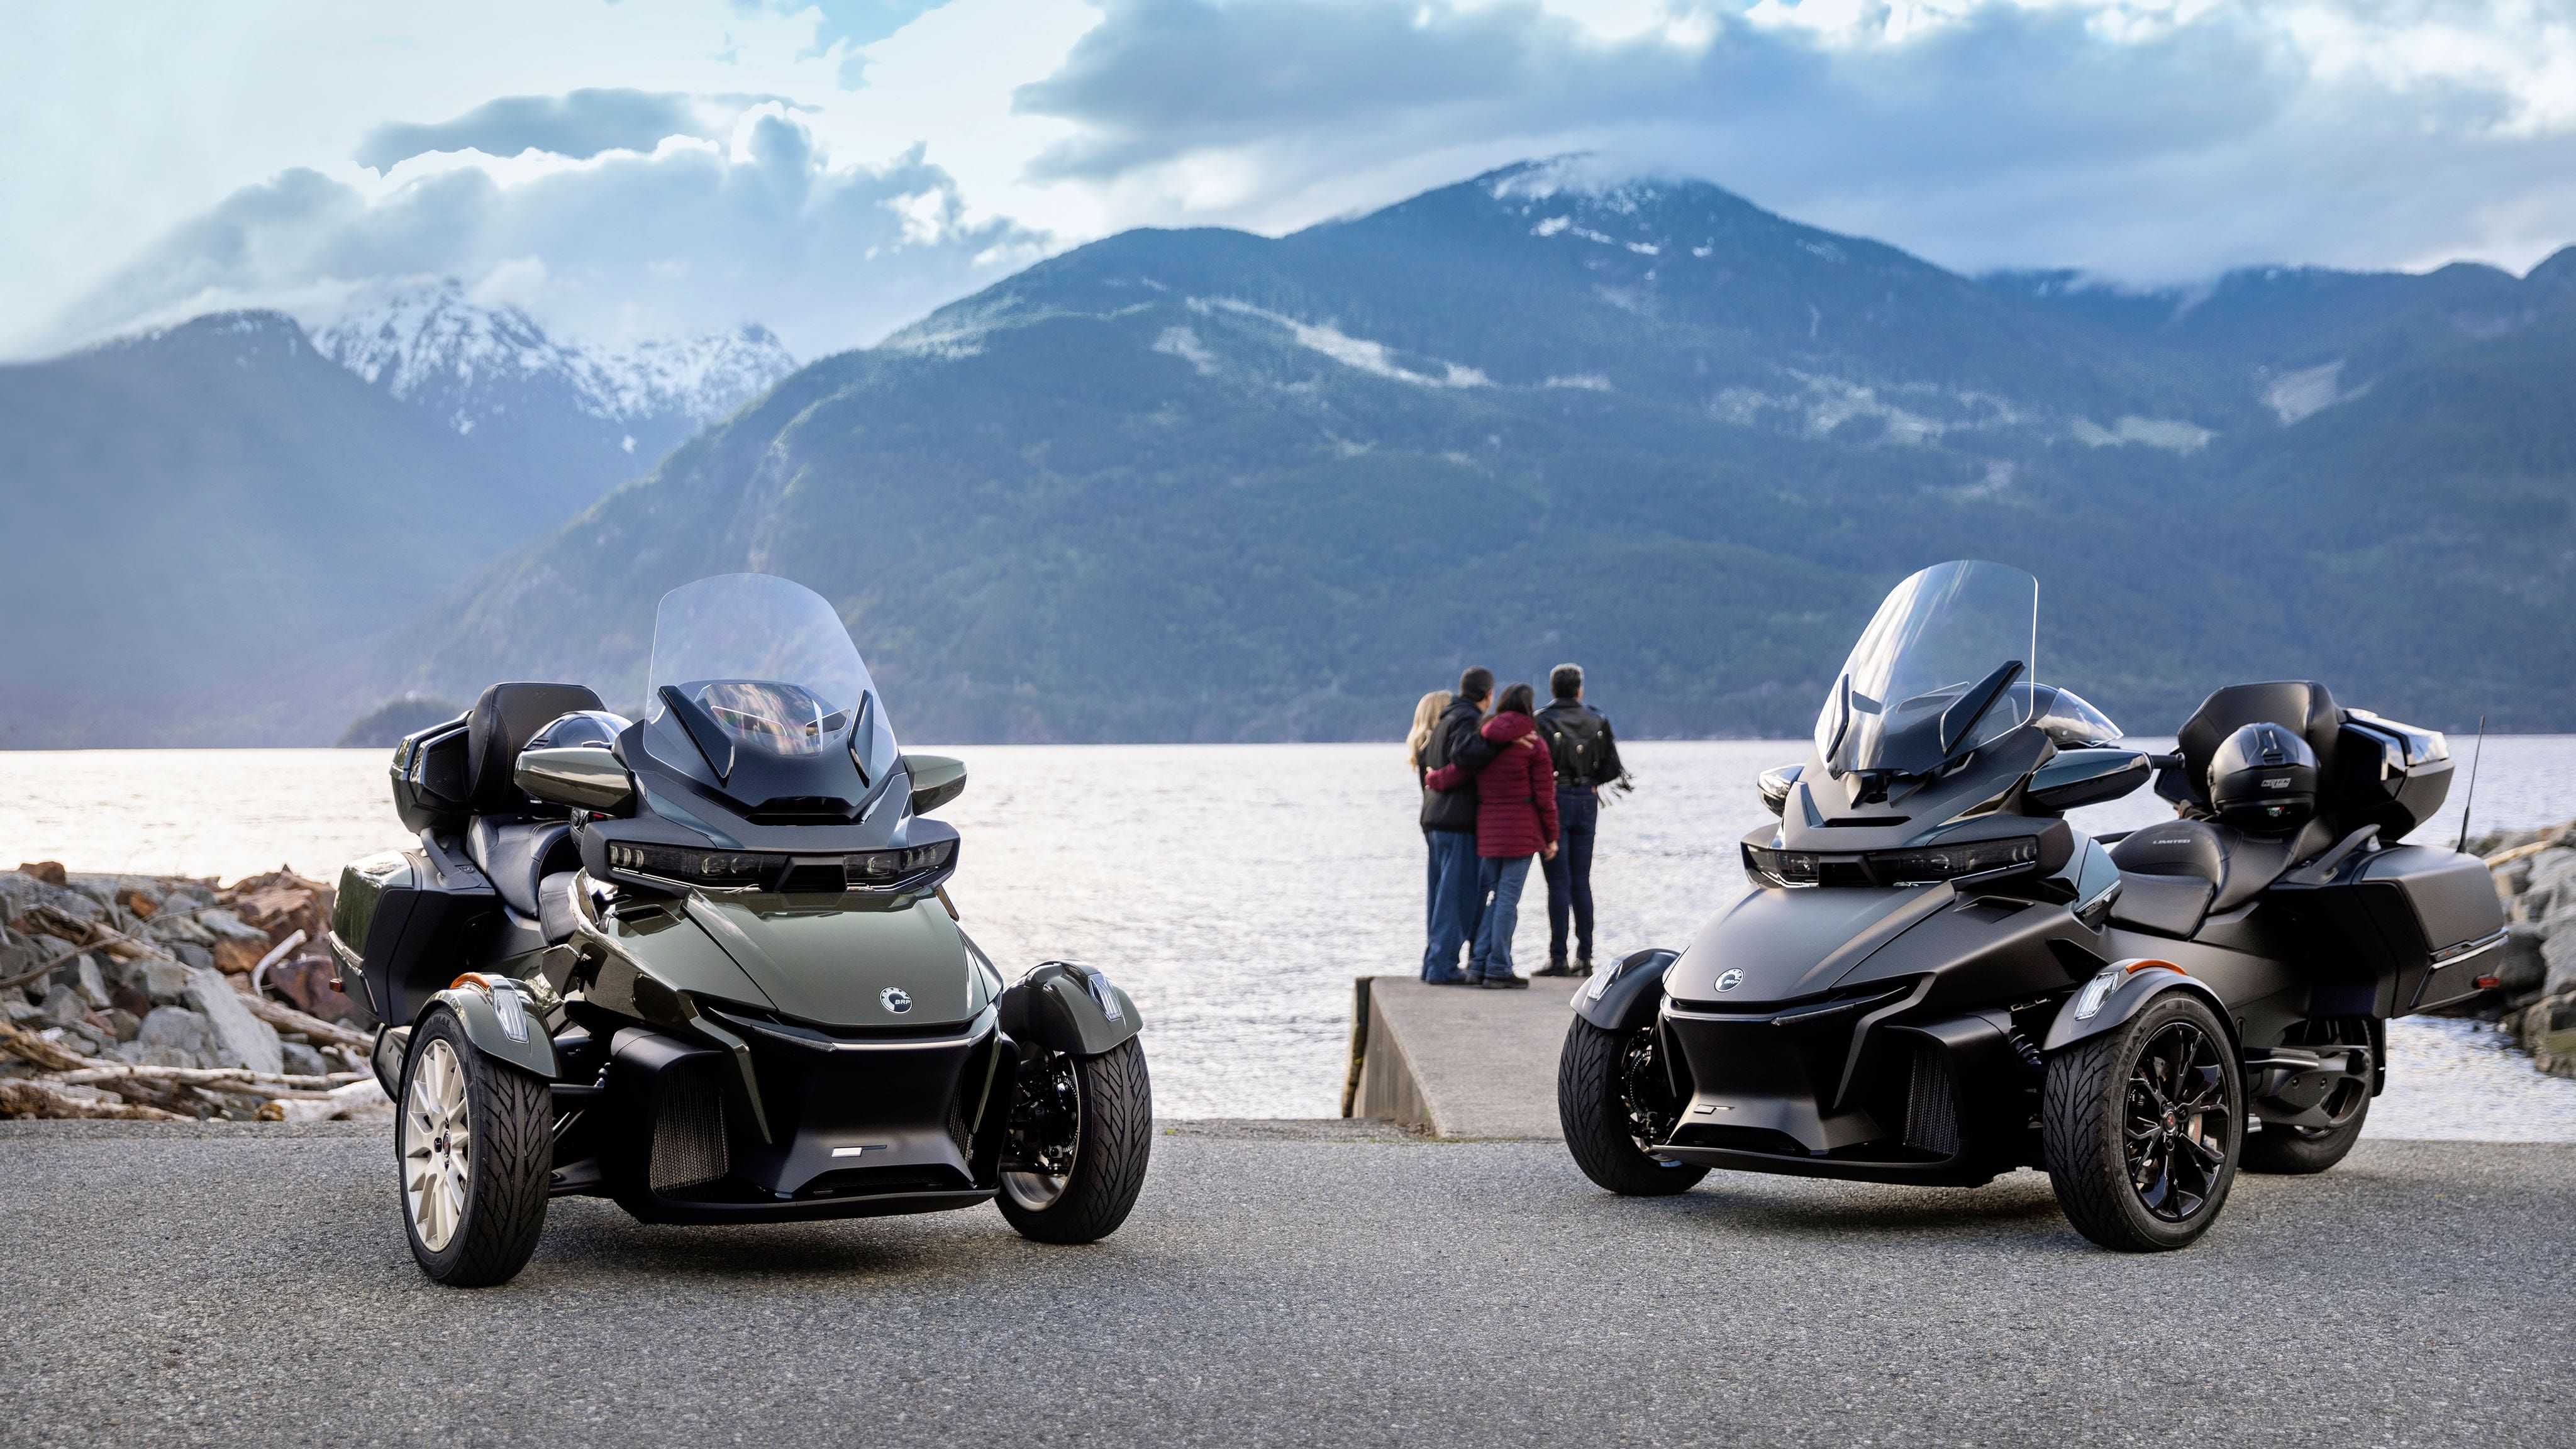 CAN - AM SPYDER RT Limited 2023